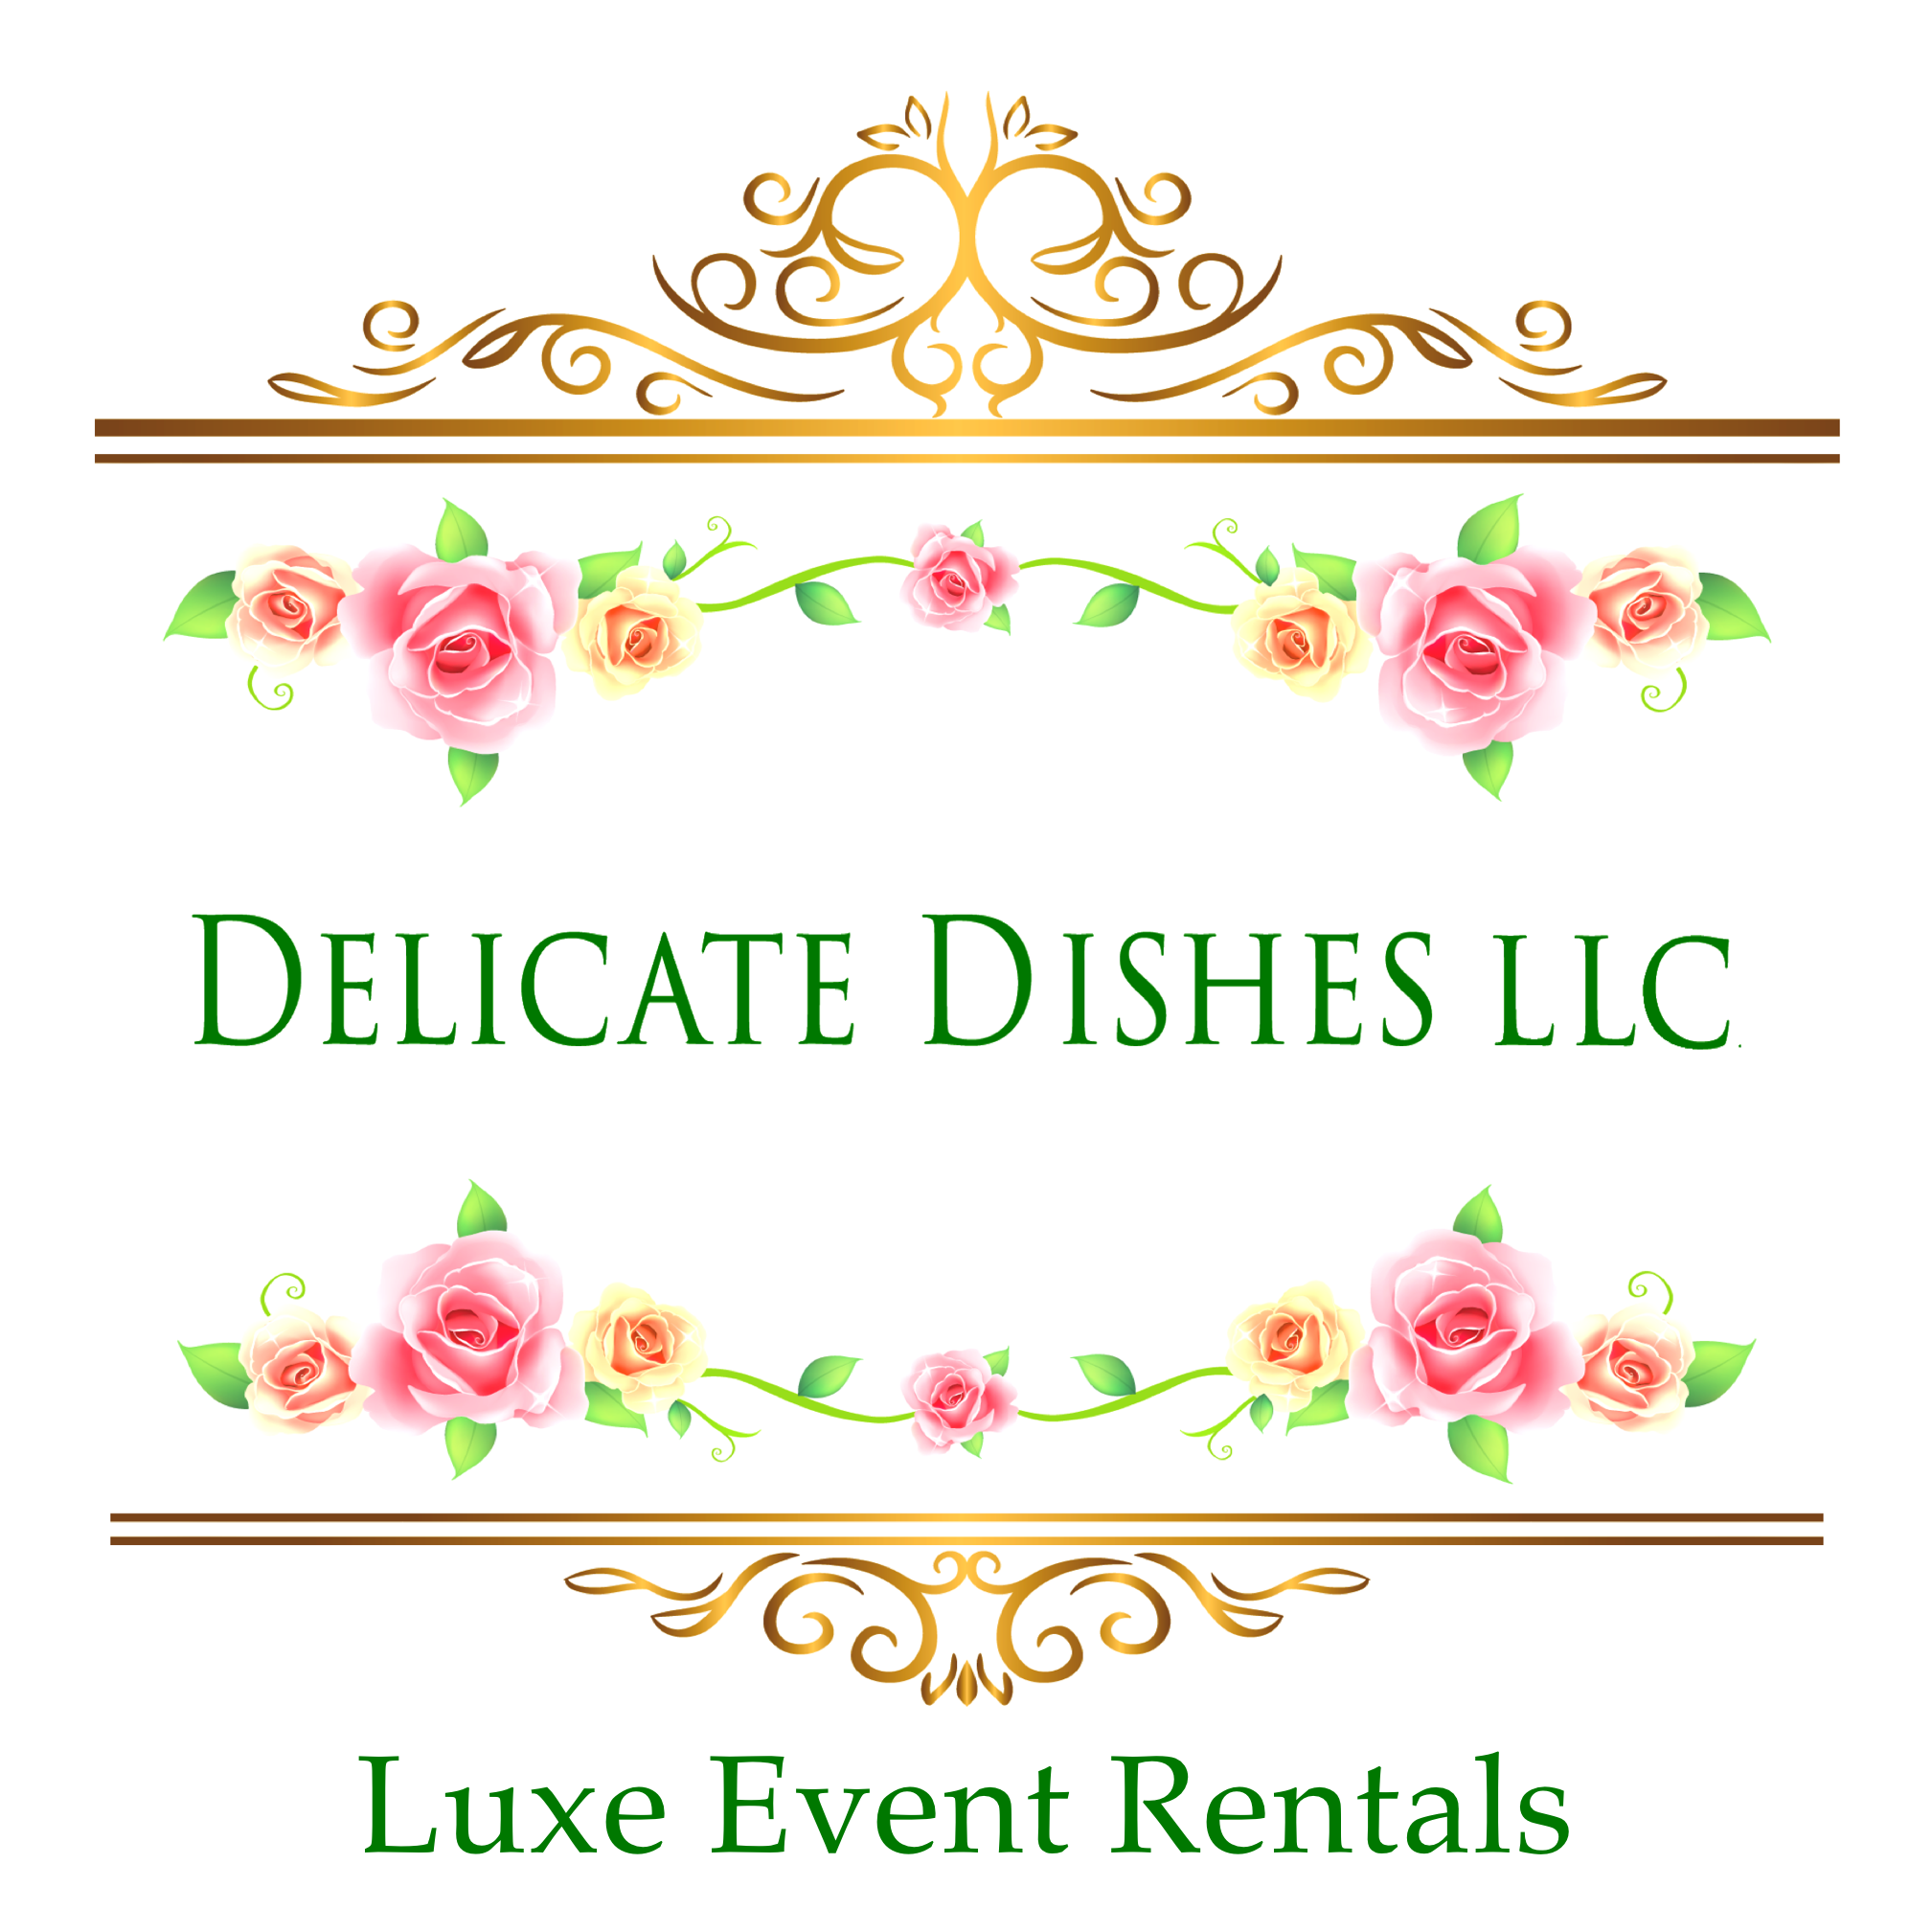 Delicate Dishes LLC